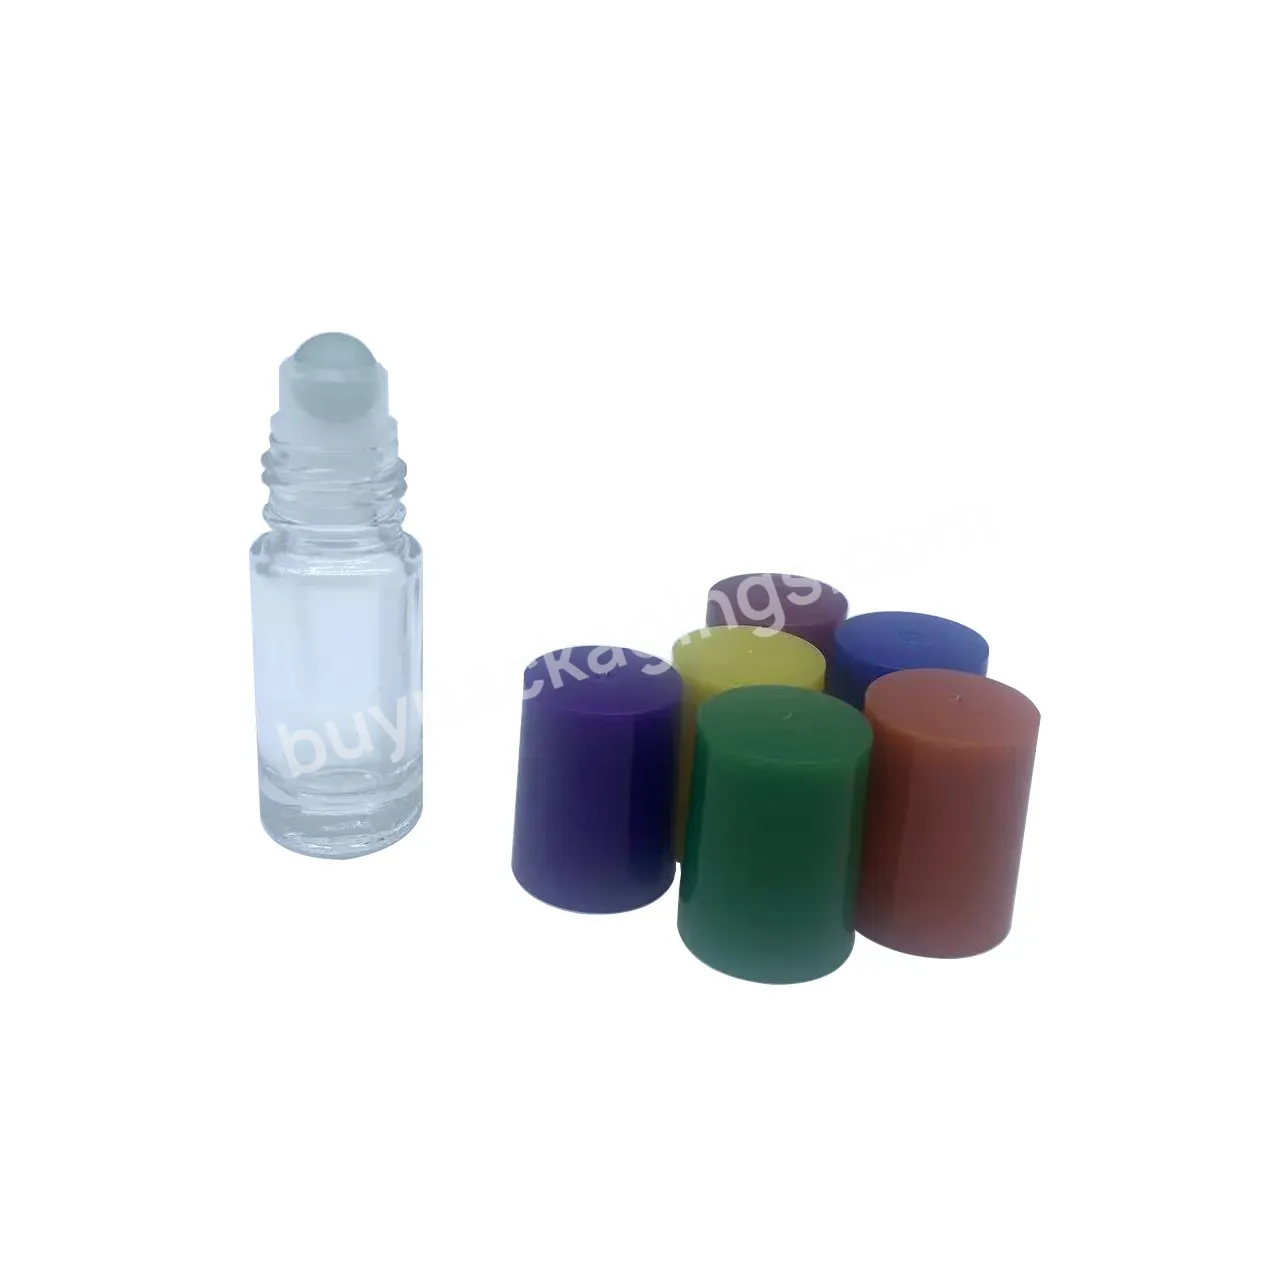 5ml Round Thick Bottom Empty Clear Glass Essential Oil Bottle With Glass Roller And Multi Colorful Plastic Lid - Buy 5ml Clear Glass Roller Bottle,1/6oz Thick Glass Essential Oil Bottle With Roller,Round Glass Bottles With Colorful Cap For Essential Oil.